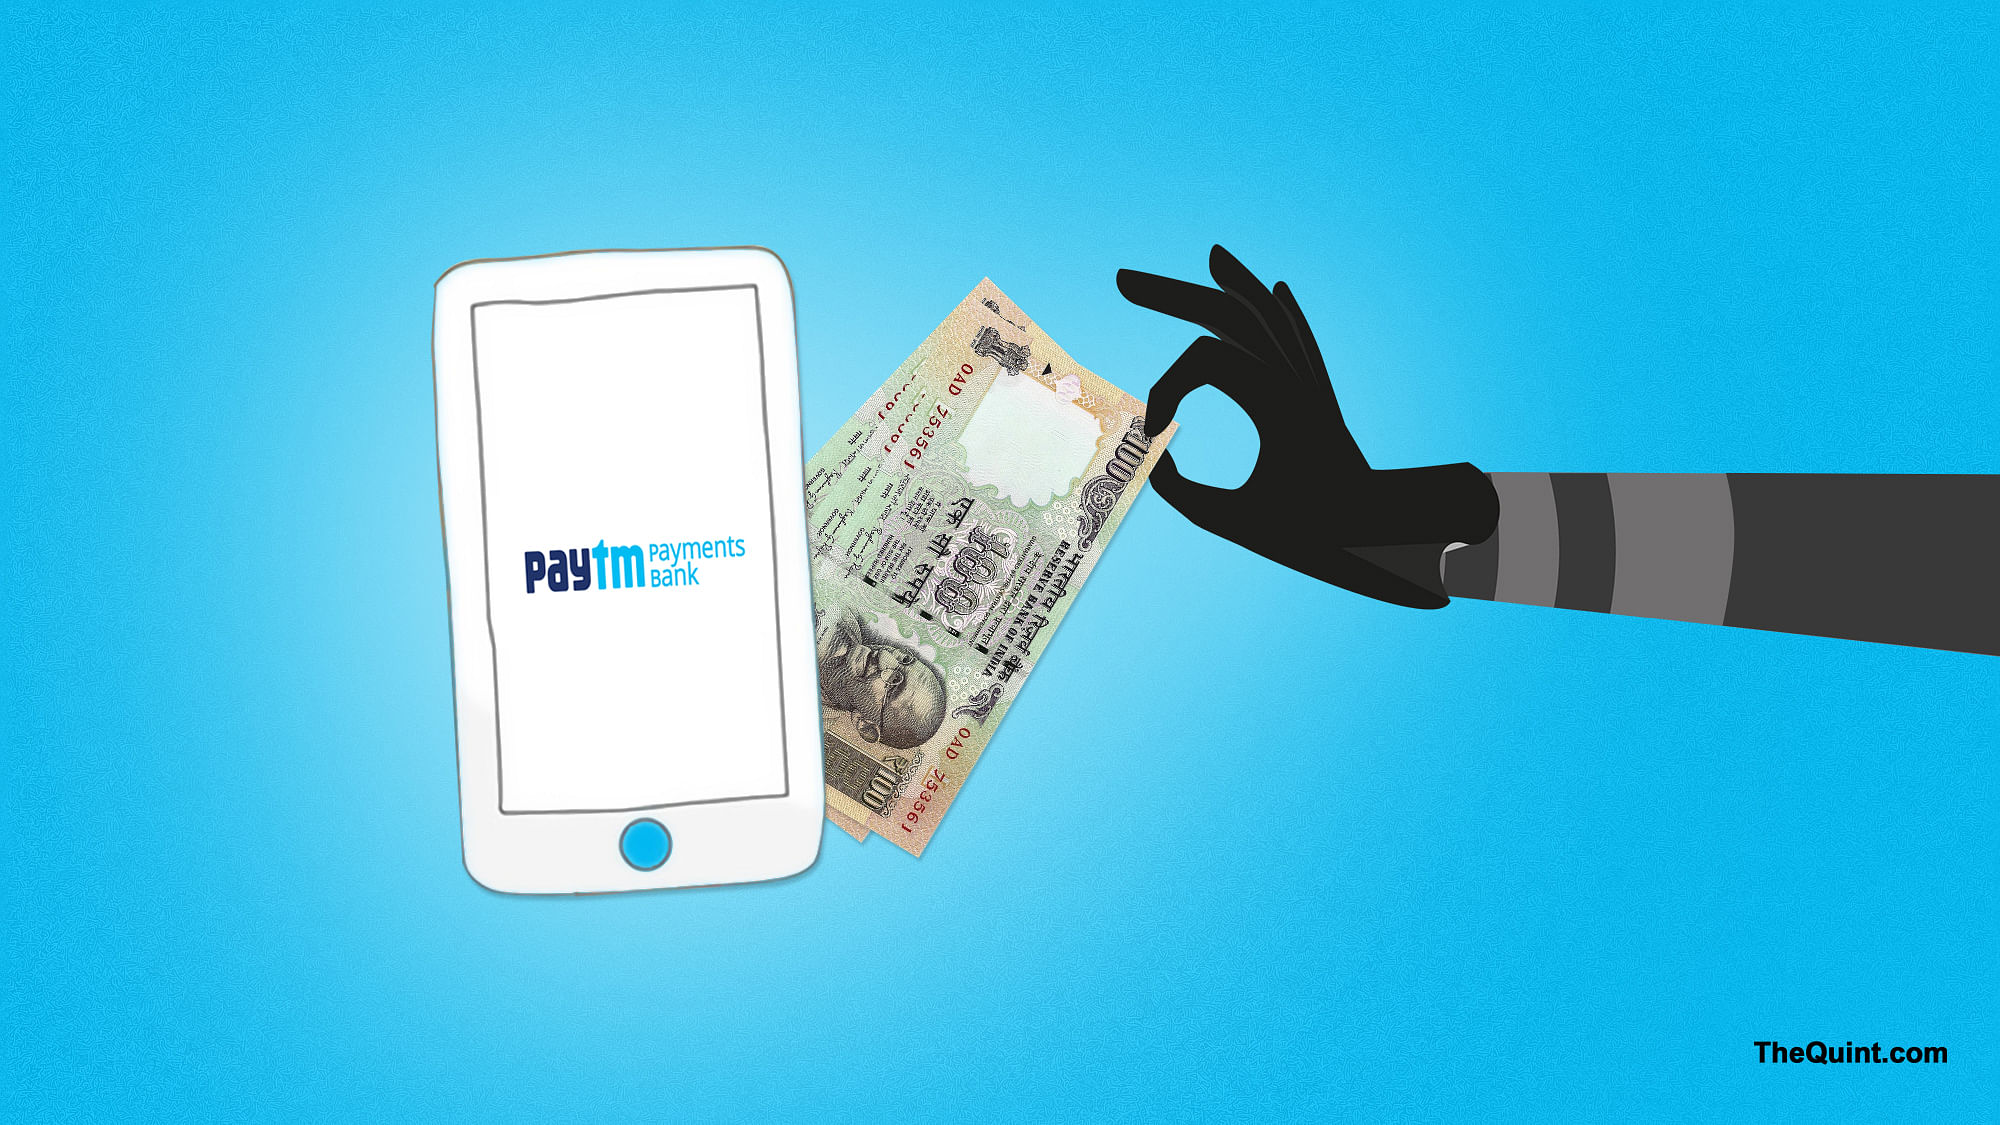 Paytm Payments Bank operates via the Paytm app itself.(Photo: <b>TheQuint</b>)